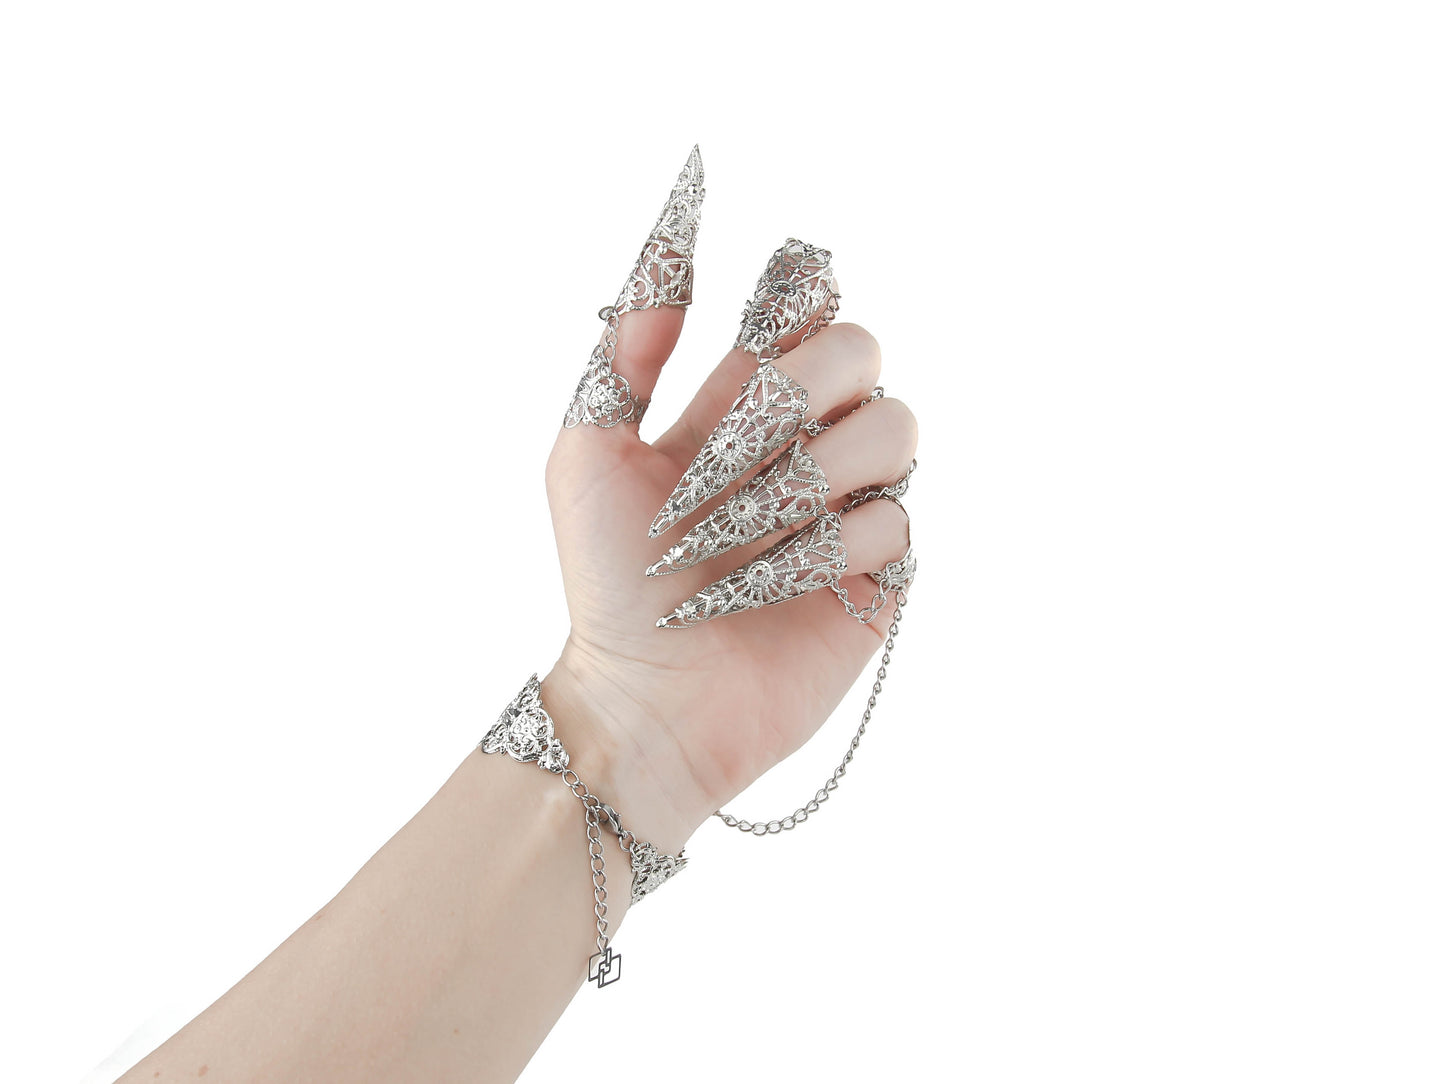 Focus on claw rings of a hand adorned with silver claw rings and chain-linked full finger armor rings, showcasing a dramatic gothic jewelry style, perfect for a dark aesthetic or avant-garde fashion statement